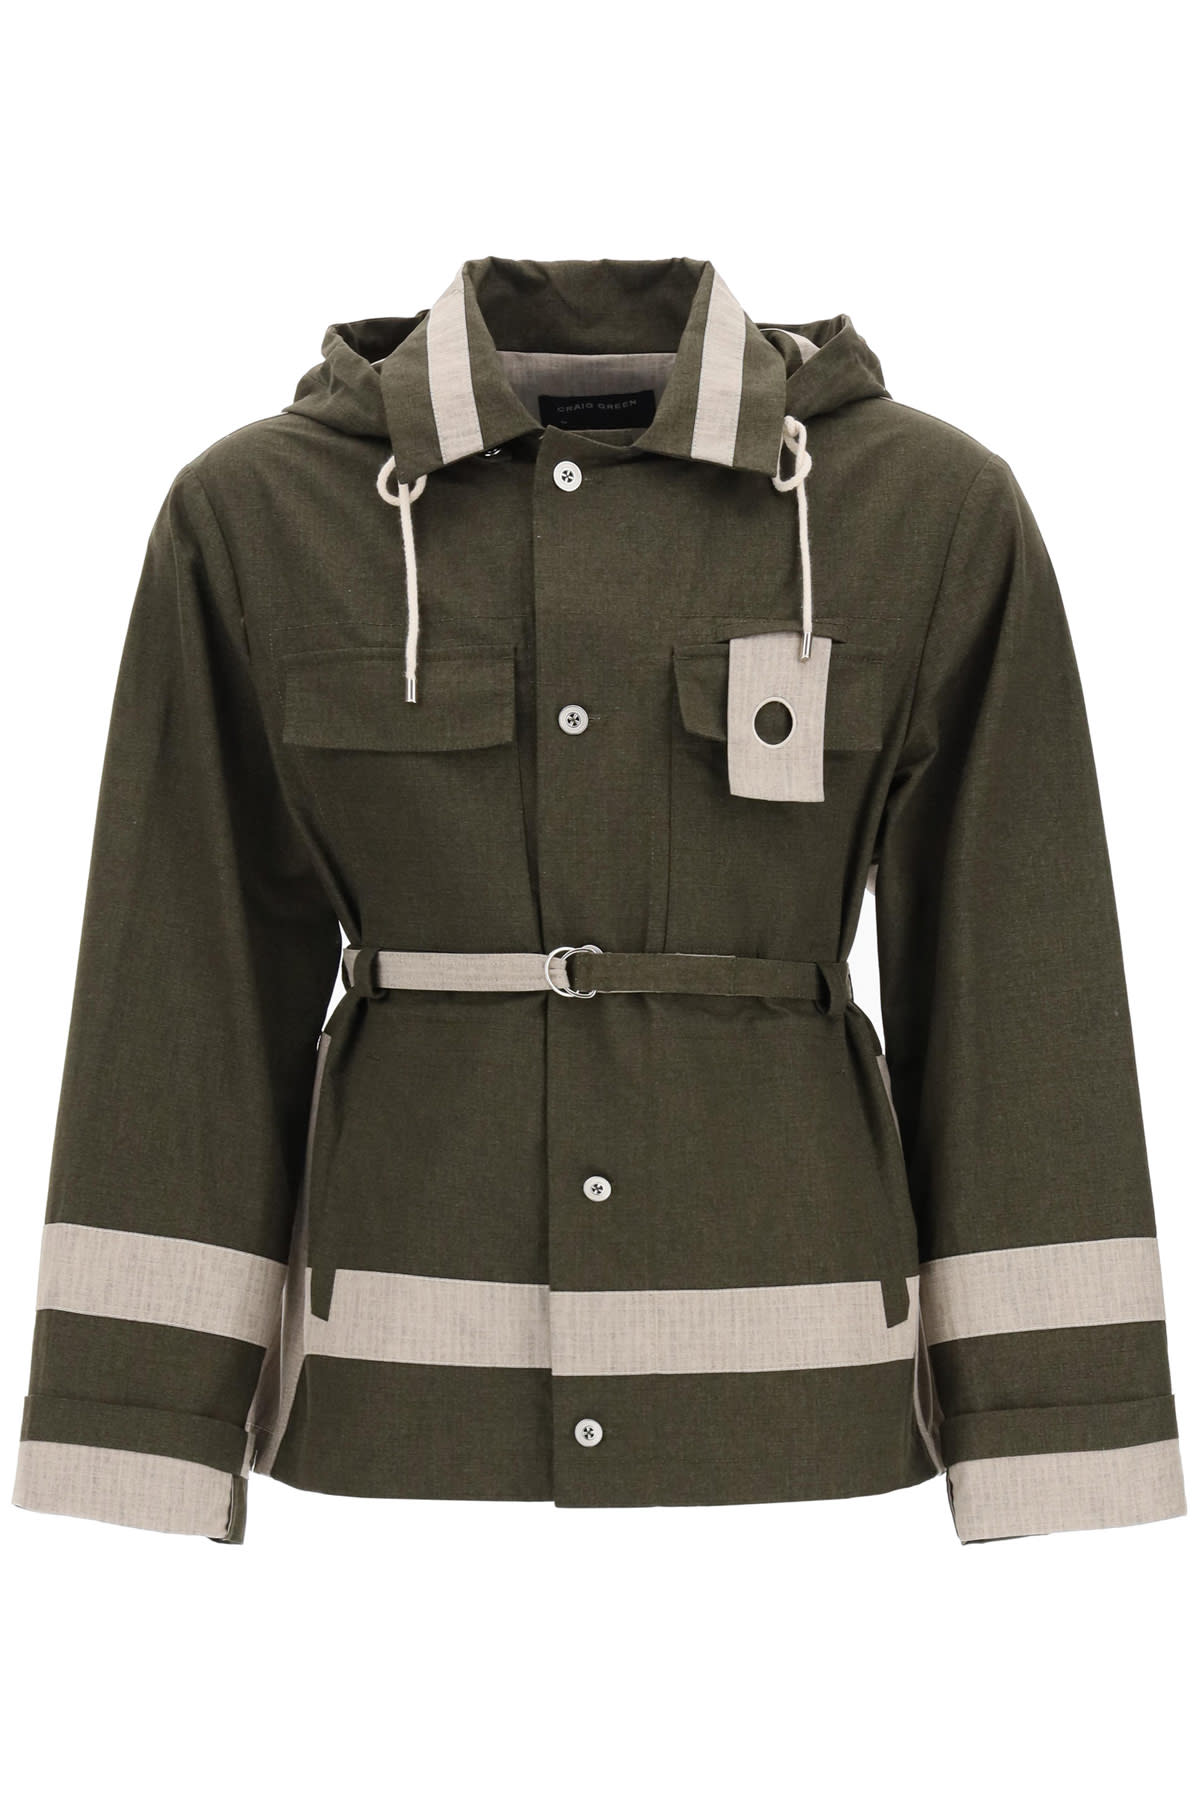 Craig Green Two-tone Utility Jacket In Cotton